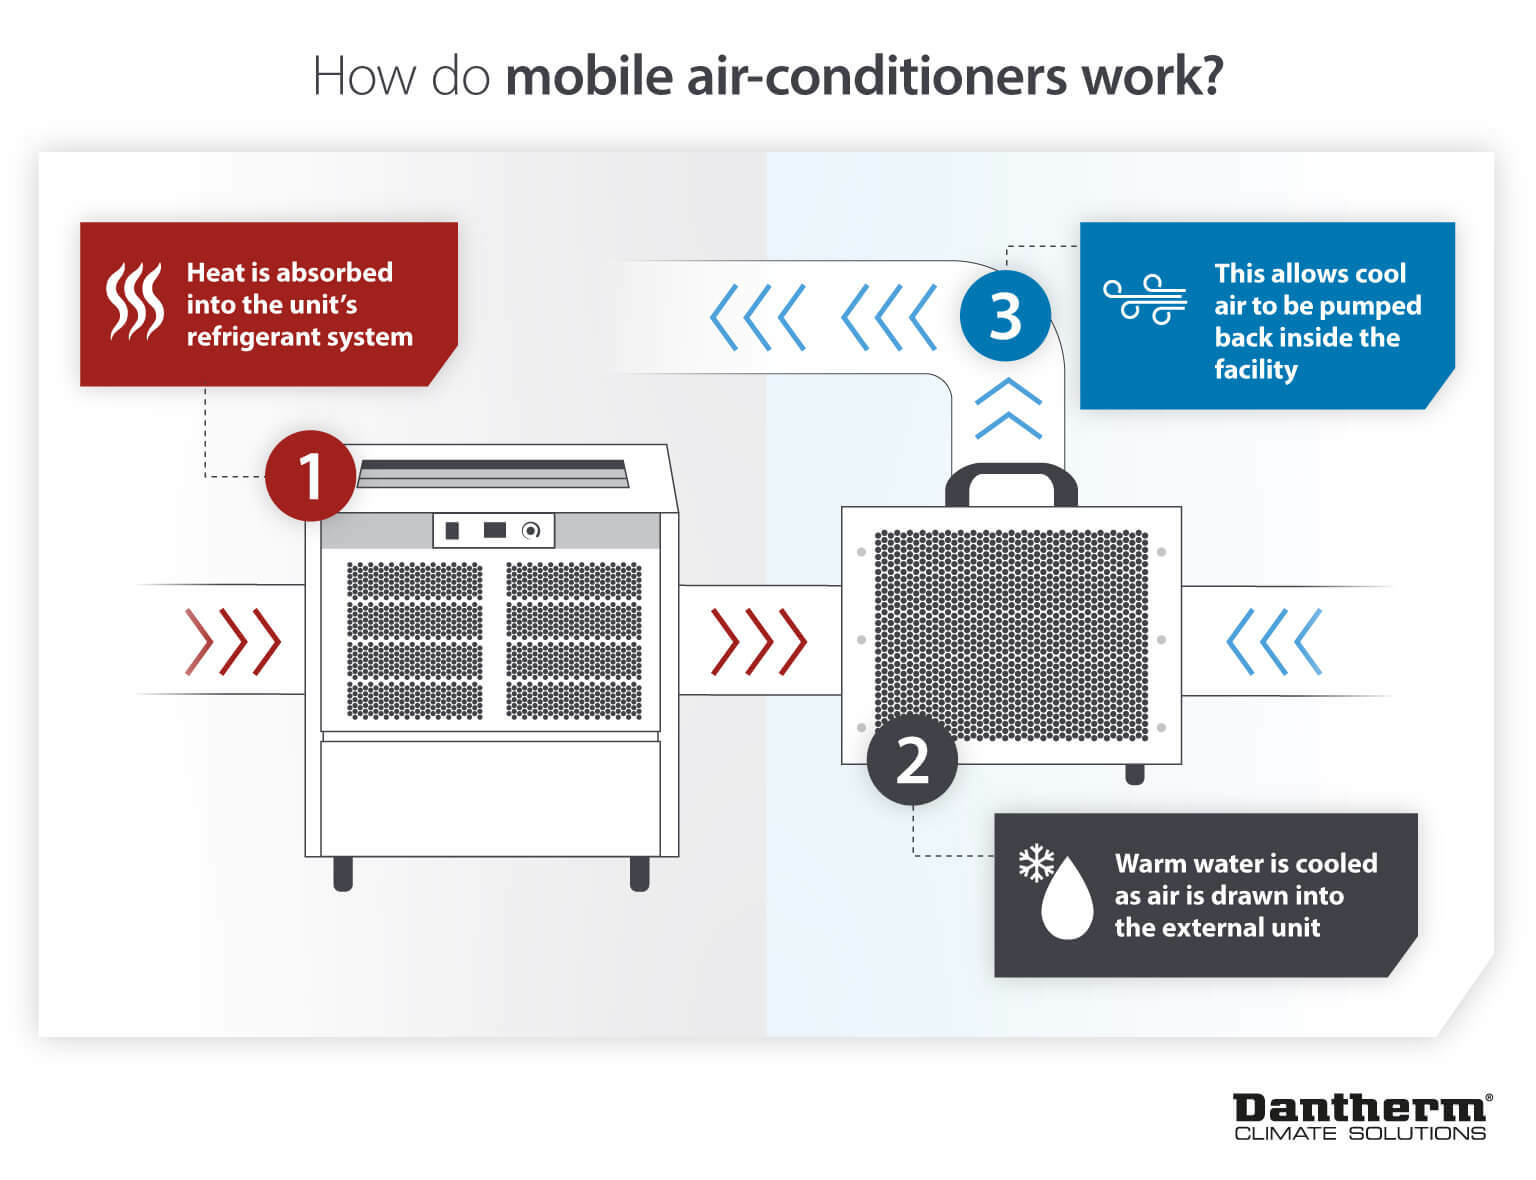 Diagram showing how mobile air conditioners work by absorbing heat before cooling and pumping cold air